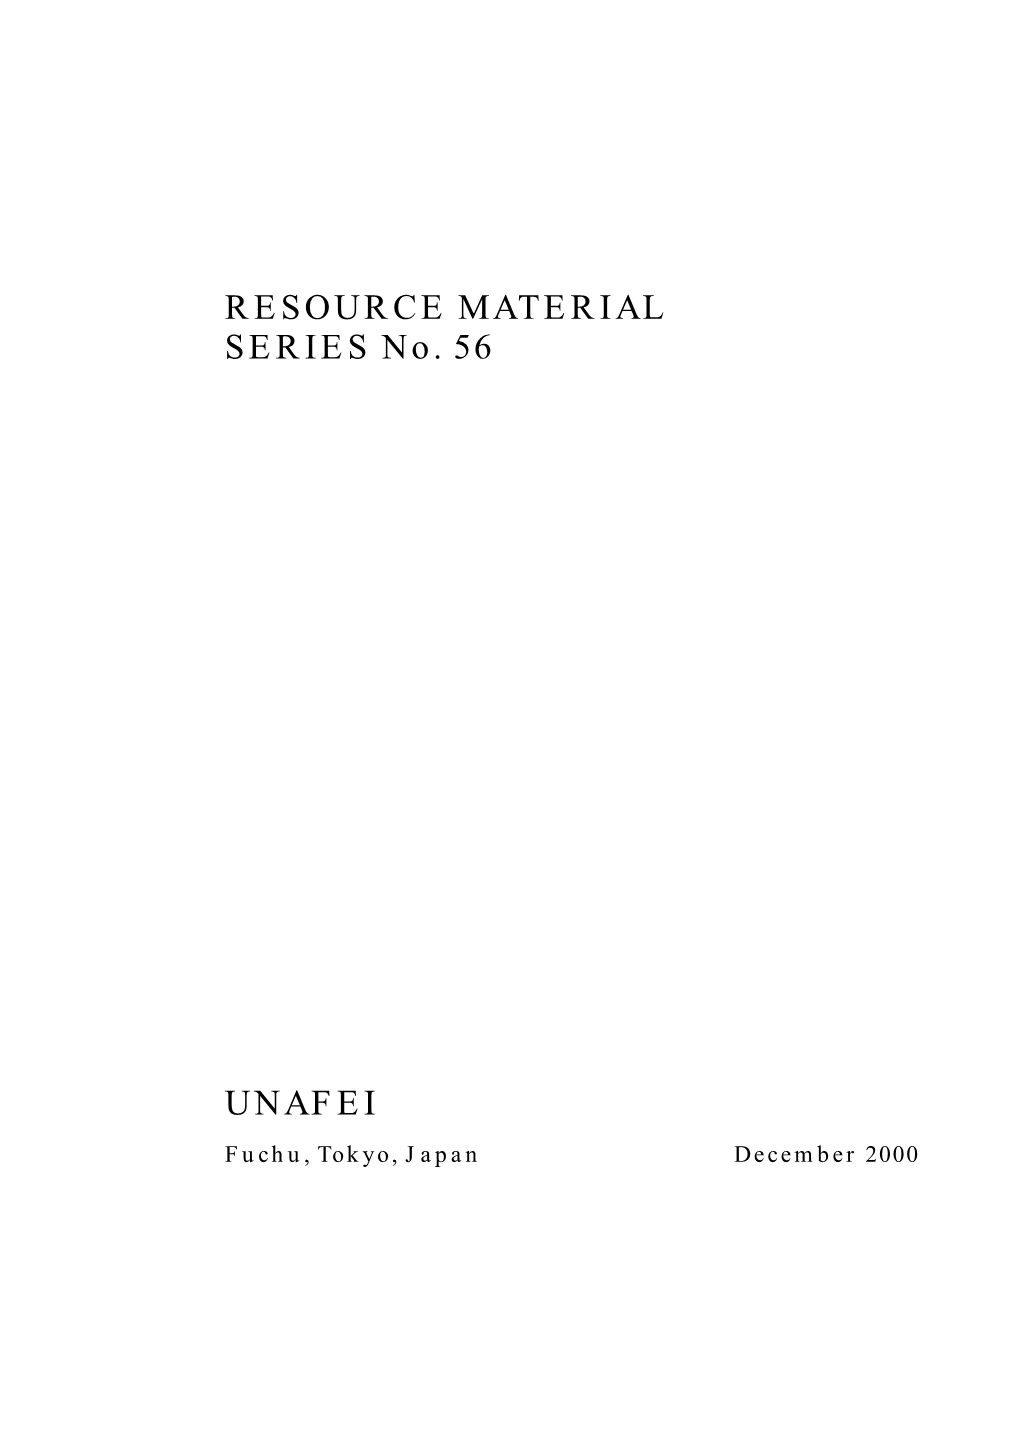 RESOURCE MATERIAL SERIES No. 56 UNAFEI